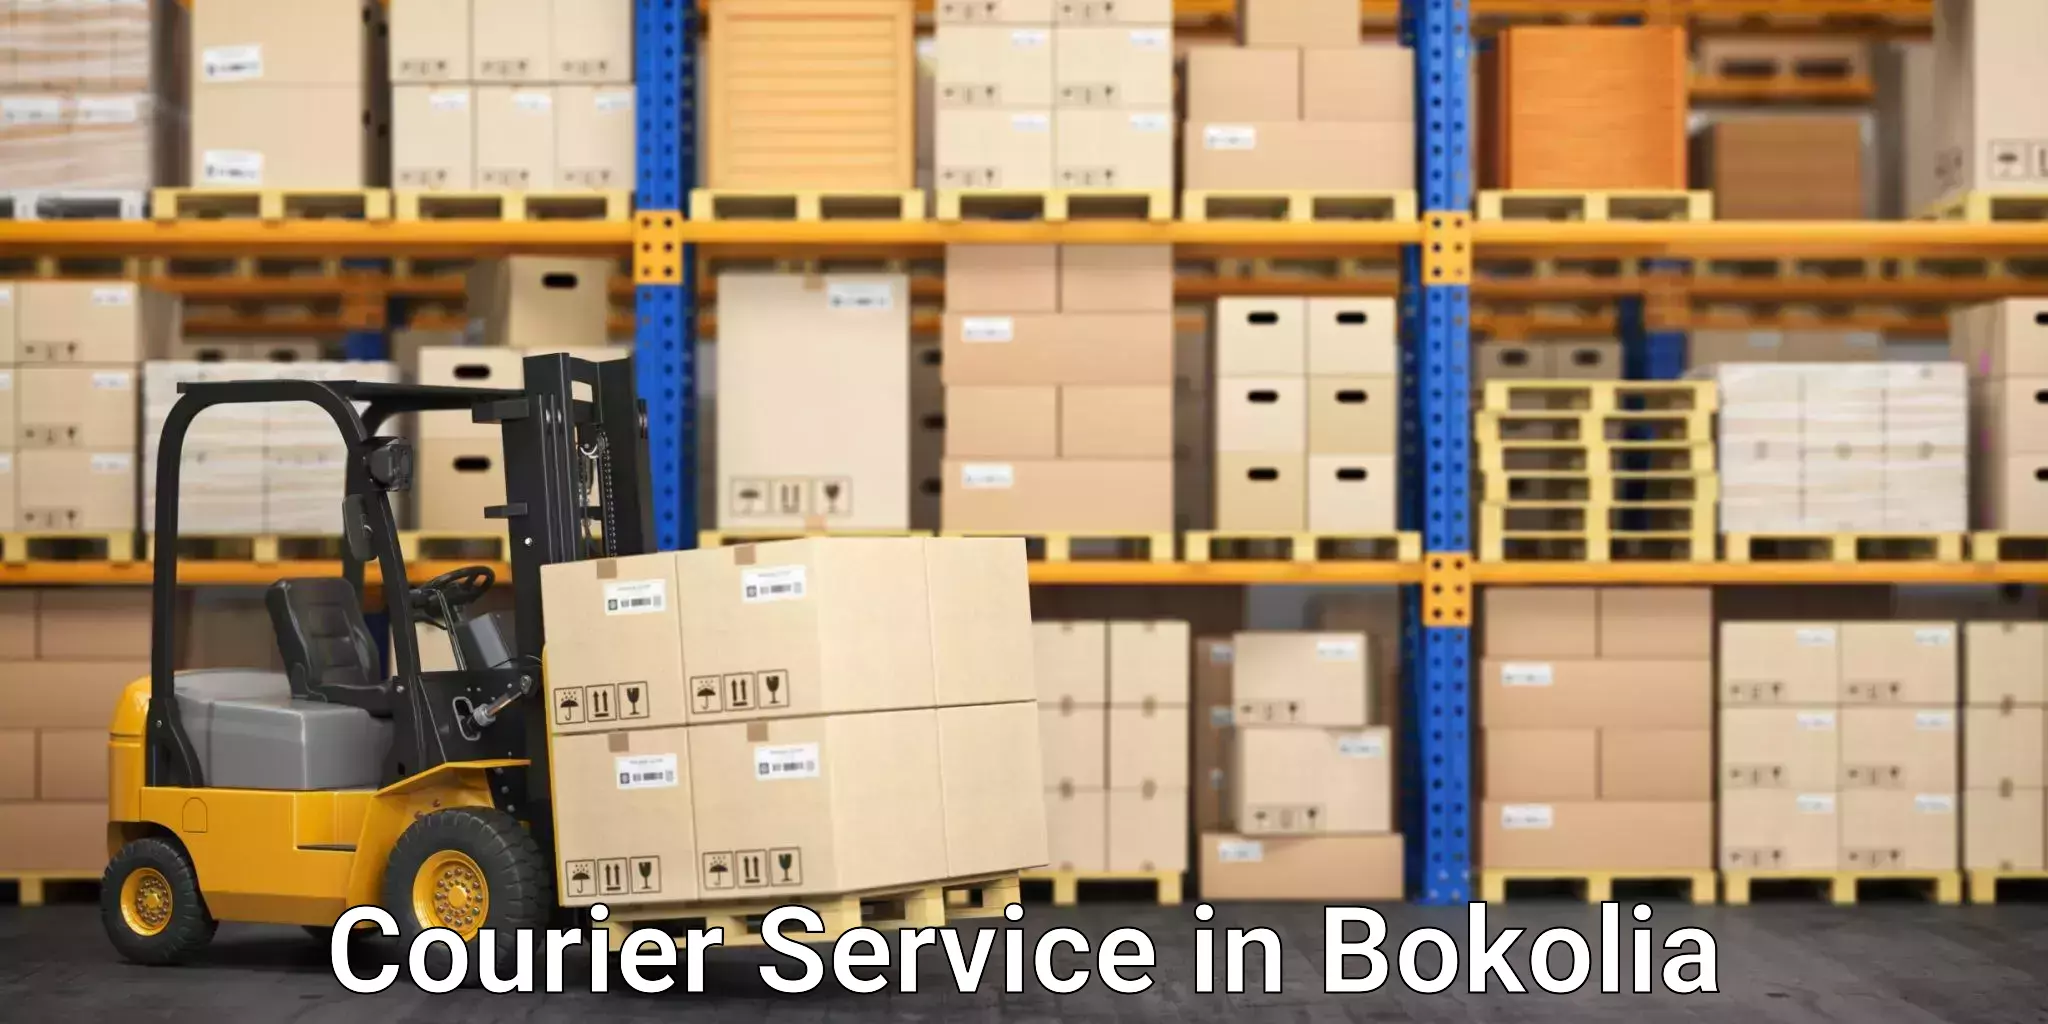 On-demand shipping options in Bokolia